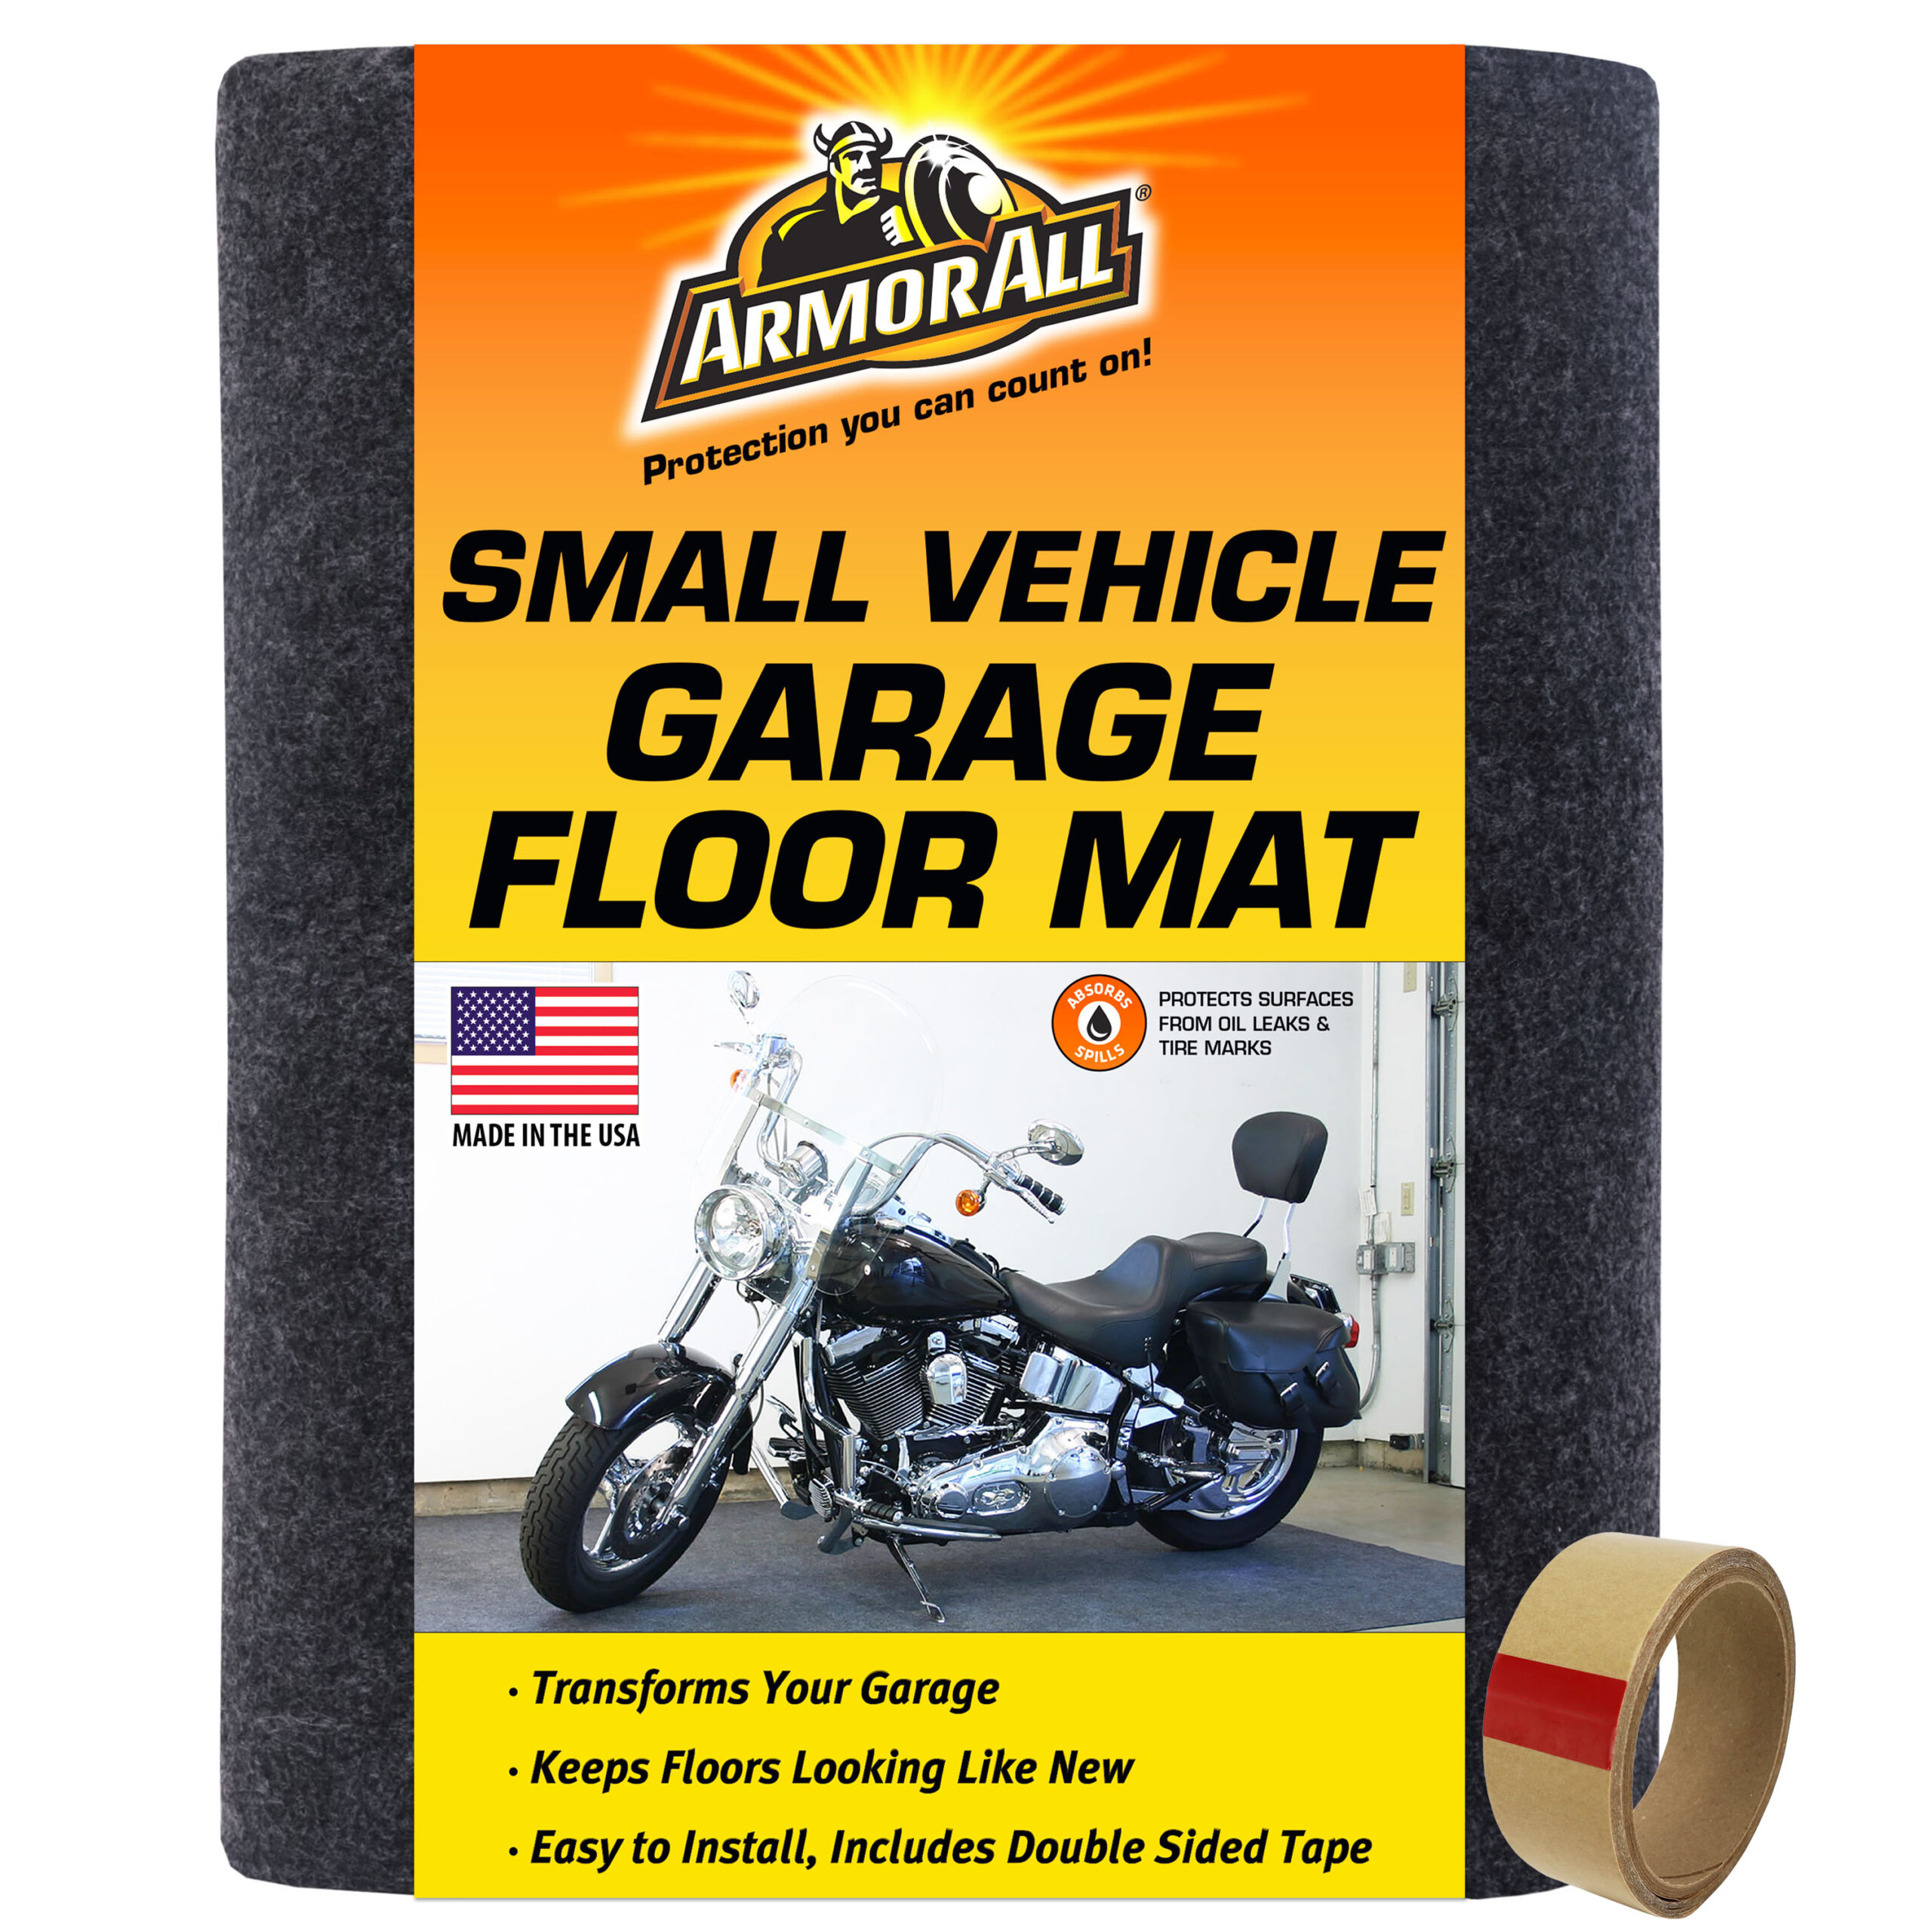 https://drymate.com/wp-content/uploads/2015/08/1-SMALL-VEHICLE-MAT-WITH-TALL-SLEEVE_Vs2-Copy-scaled.jpg